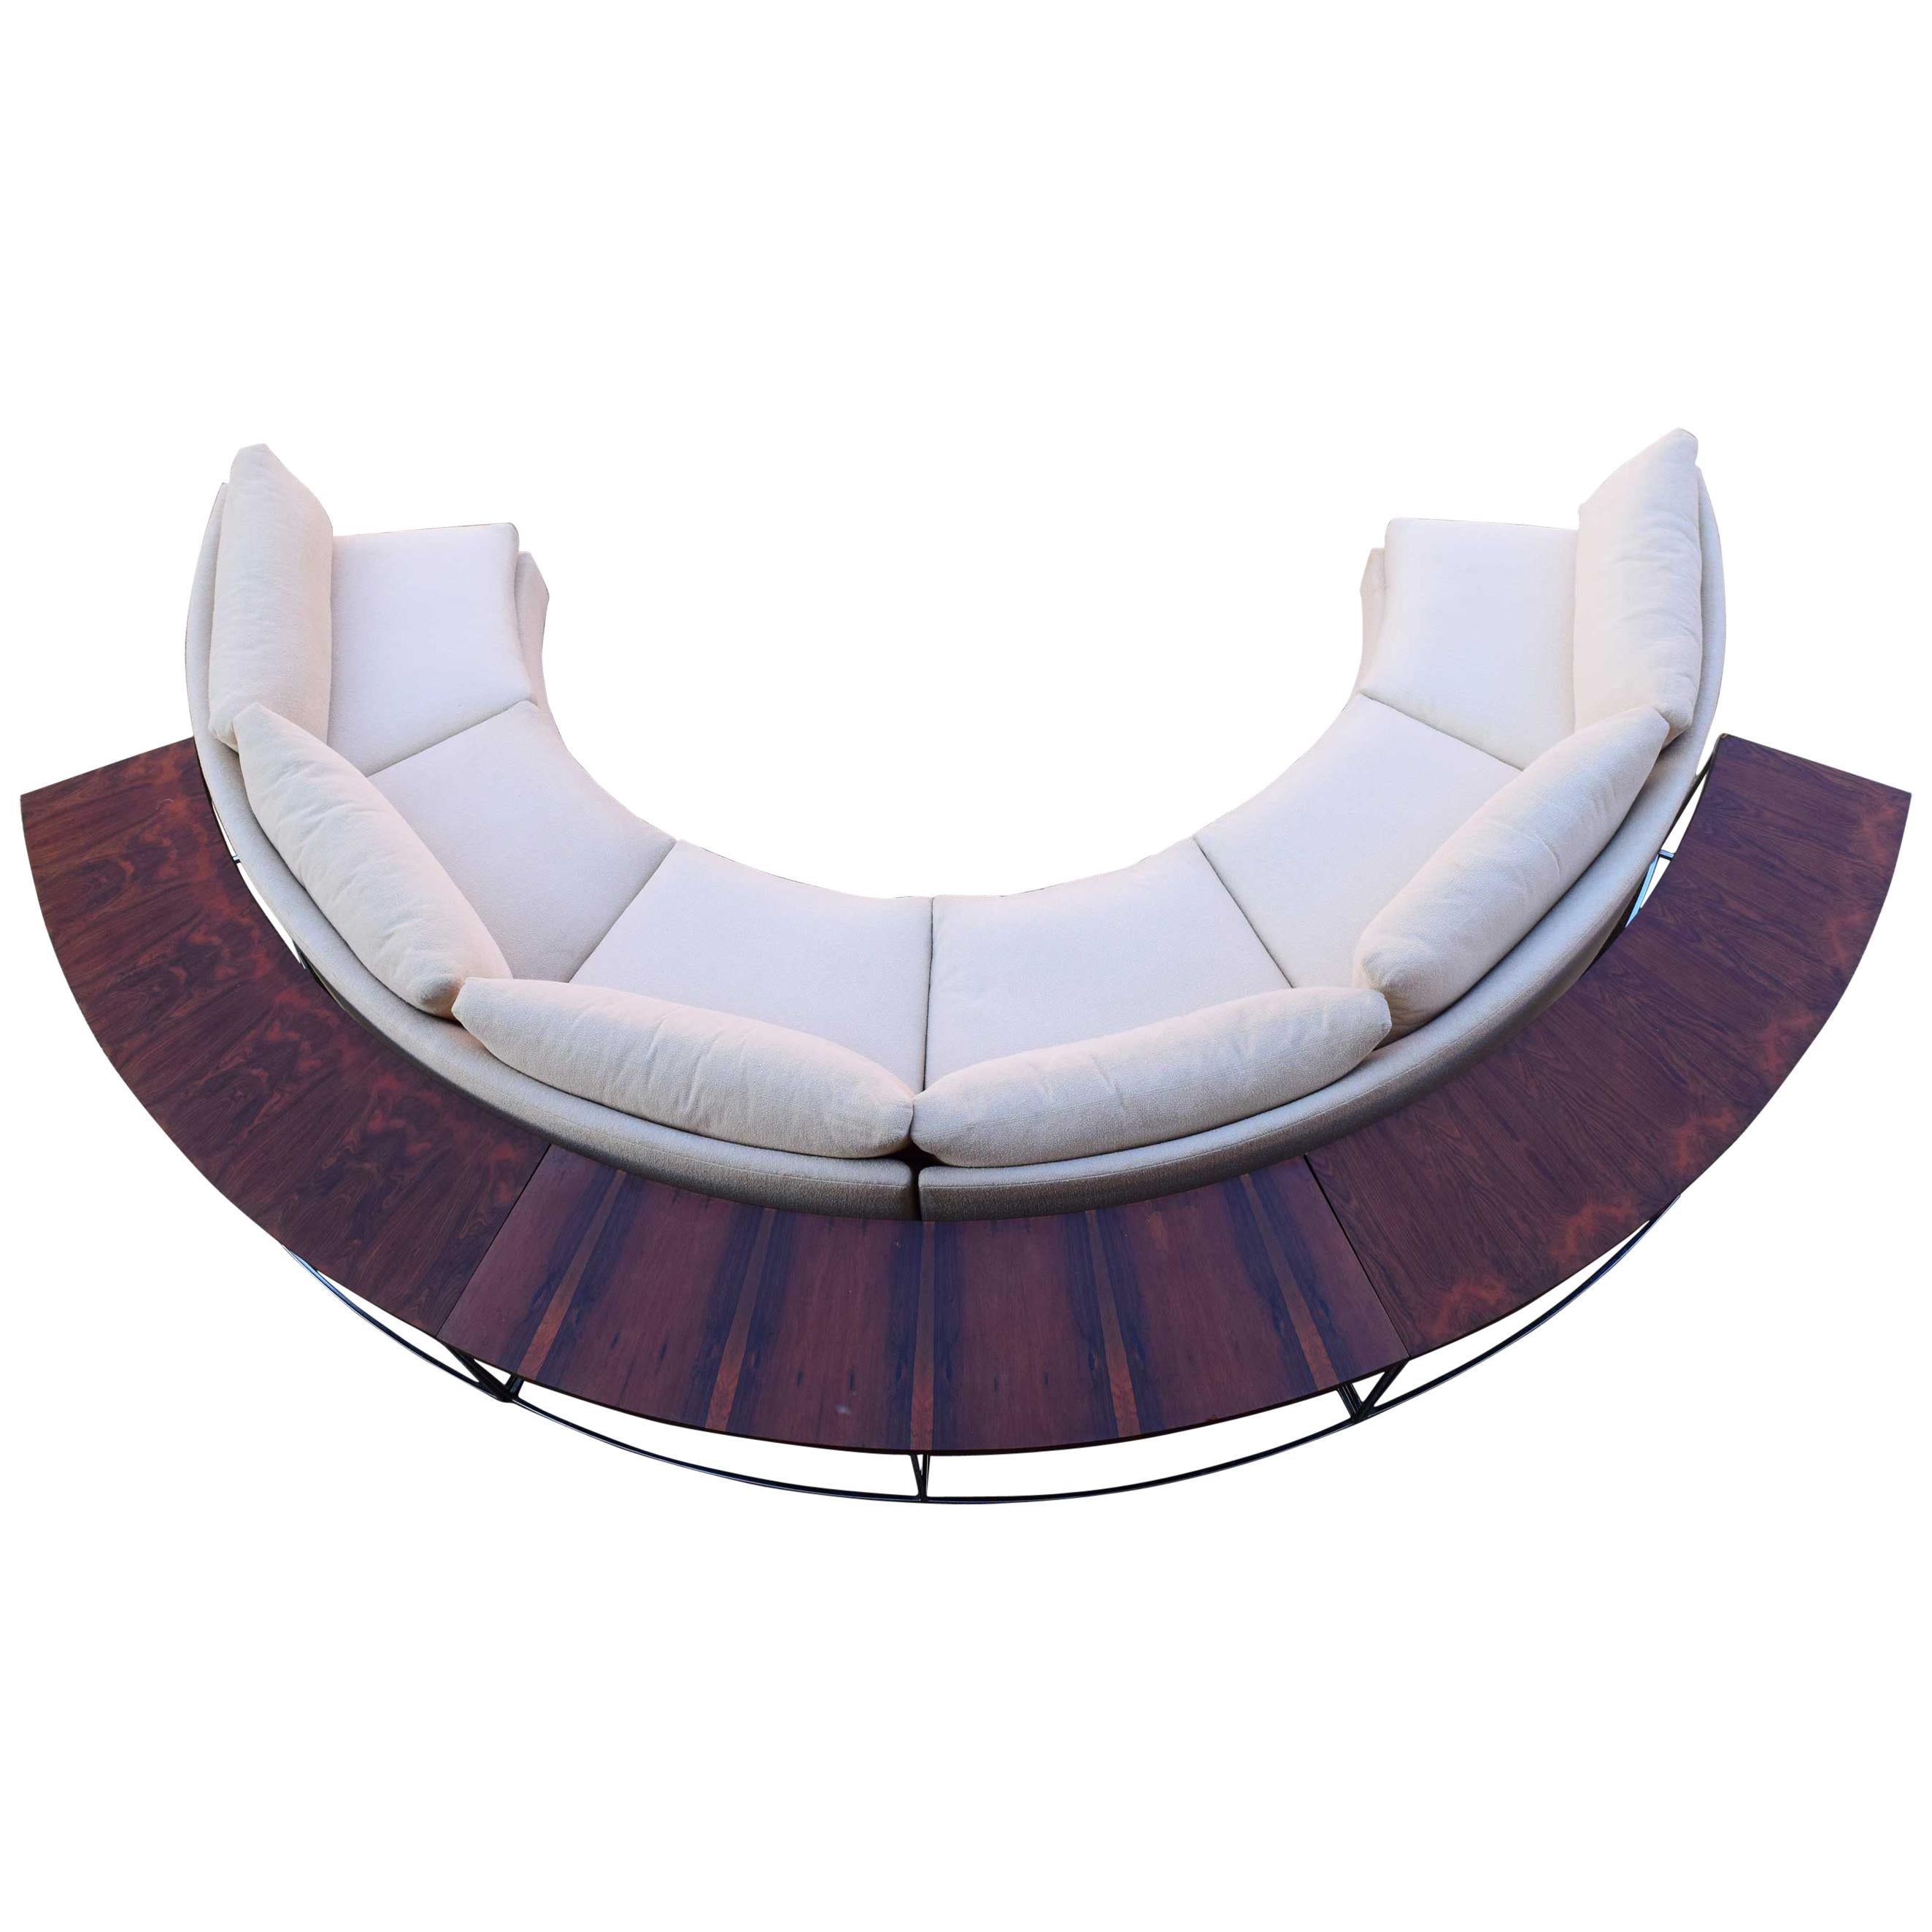 Milo Baughman Curved Sectional Sofa in Off-White with Rosewood Tables